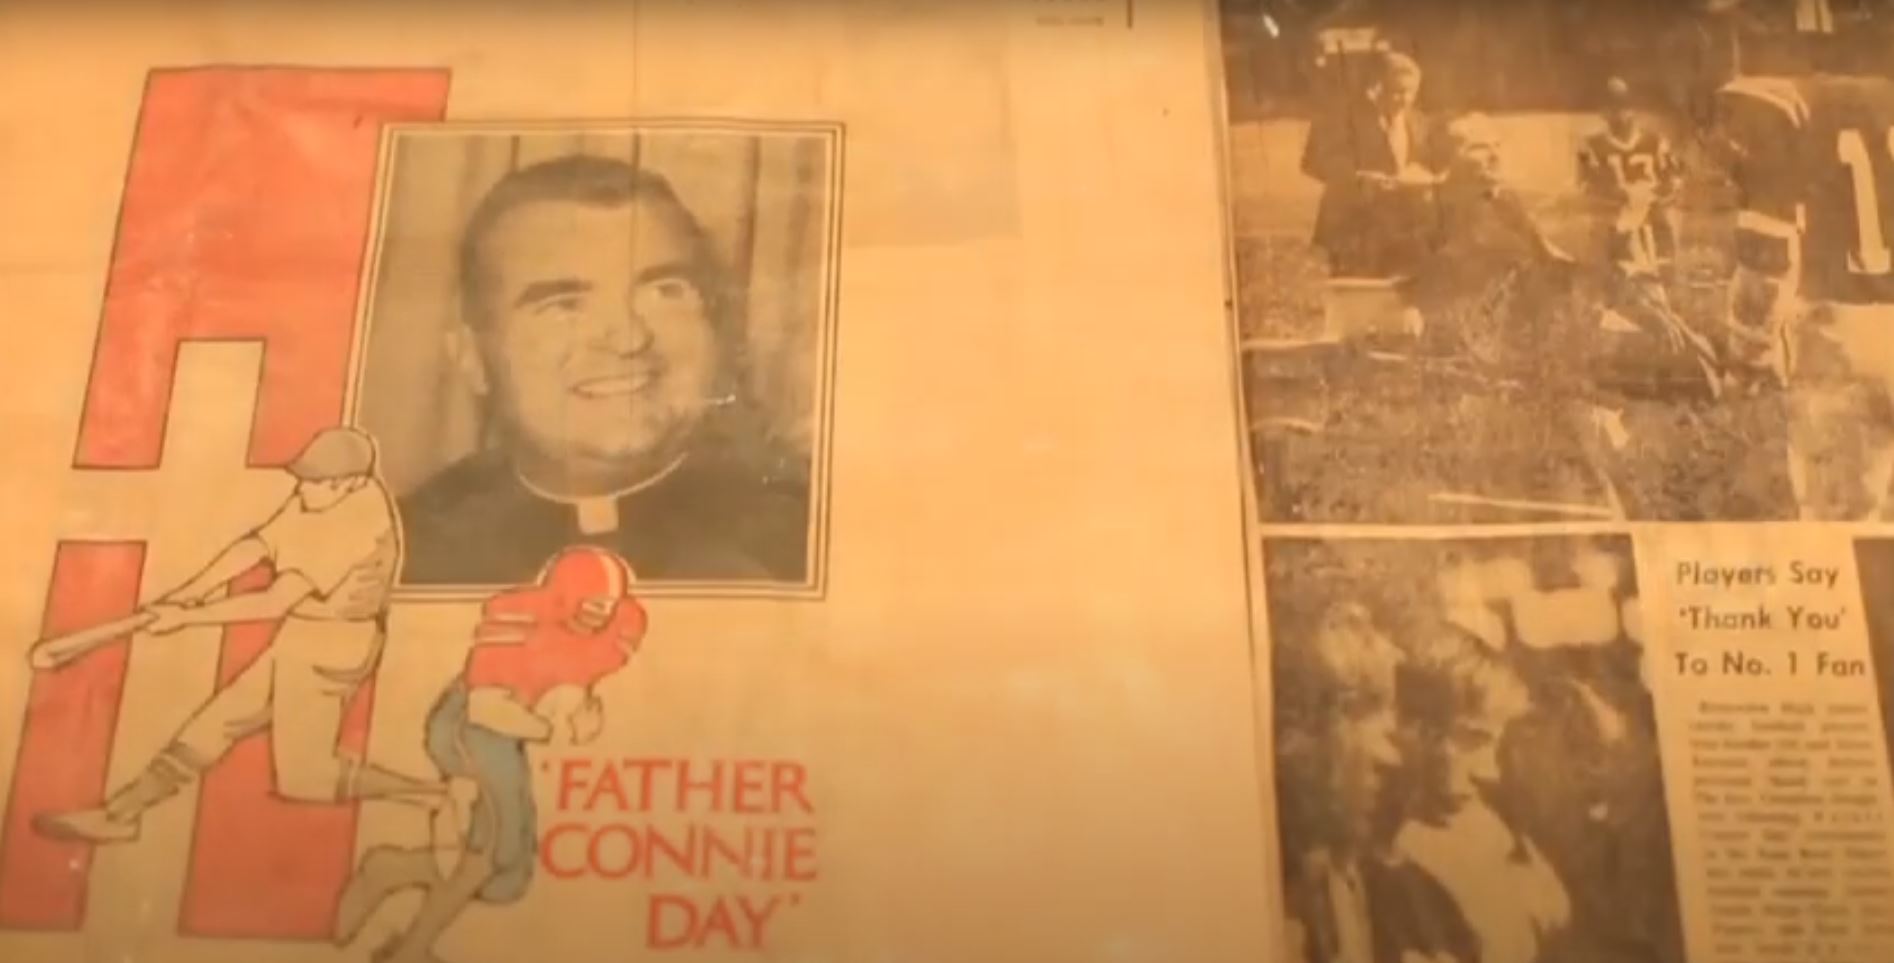 father-connie-night-newspaper-snippet.JPG